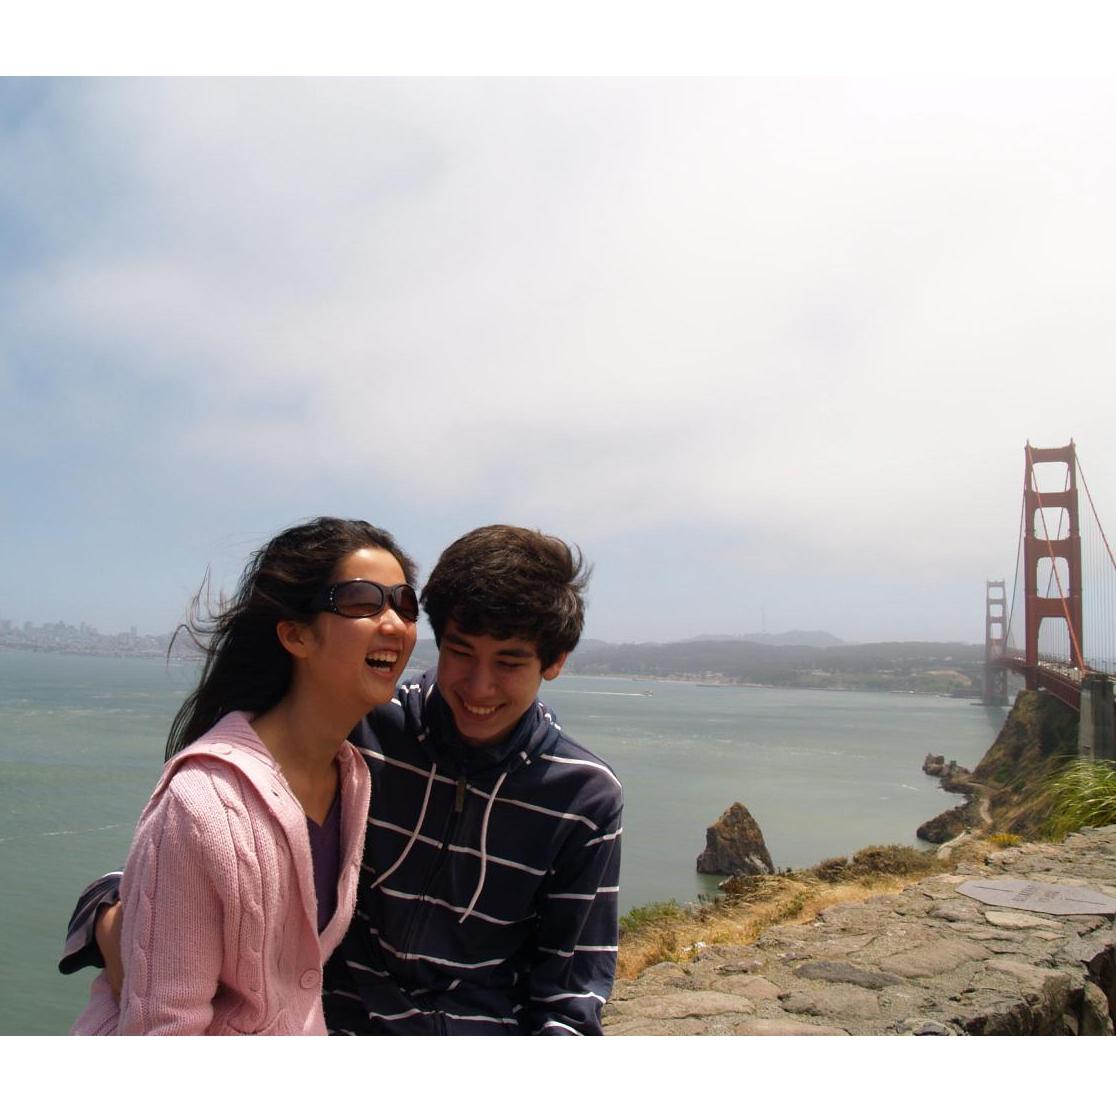 We love visiting the San Francisco area and being tourists in our own backyard! From 2012...